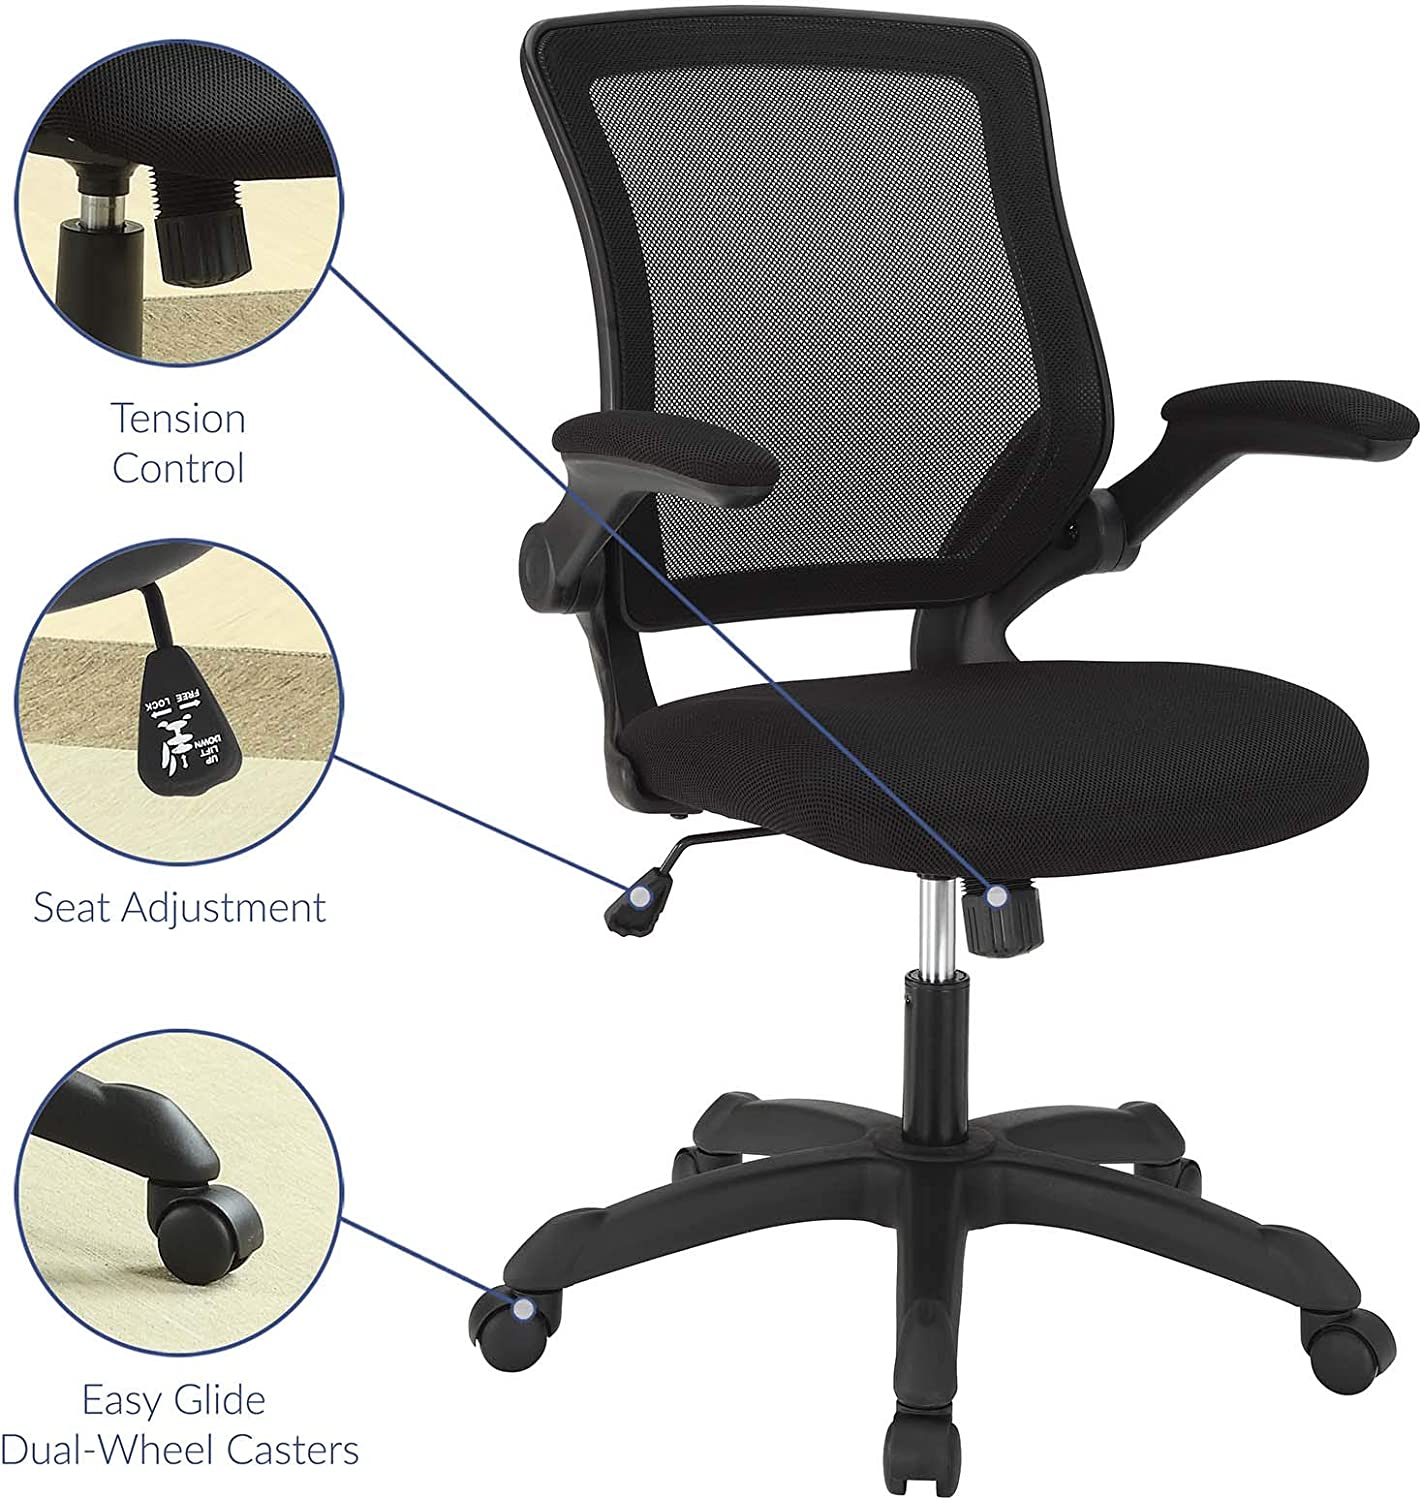 Modway Veer Office Chair with Mesh Back and Vinyl Seat With Flip-Up Arms in Tan